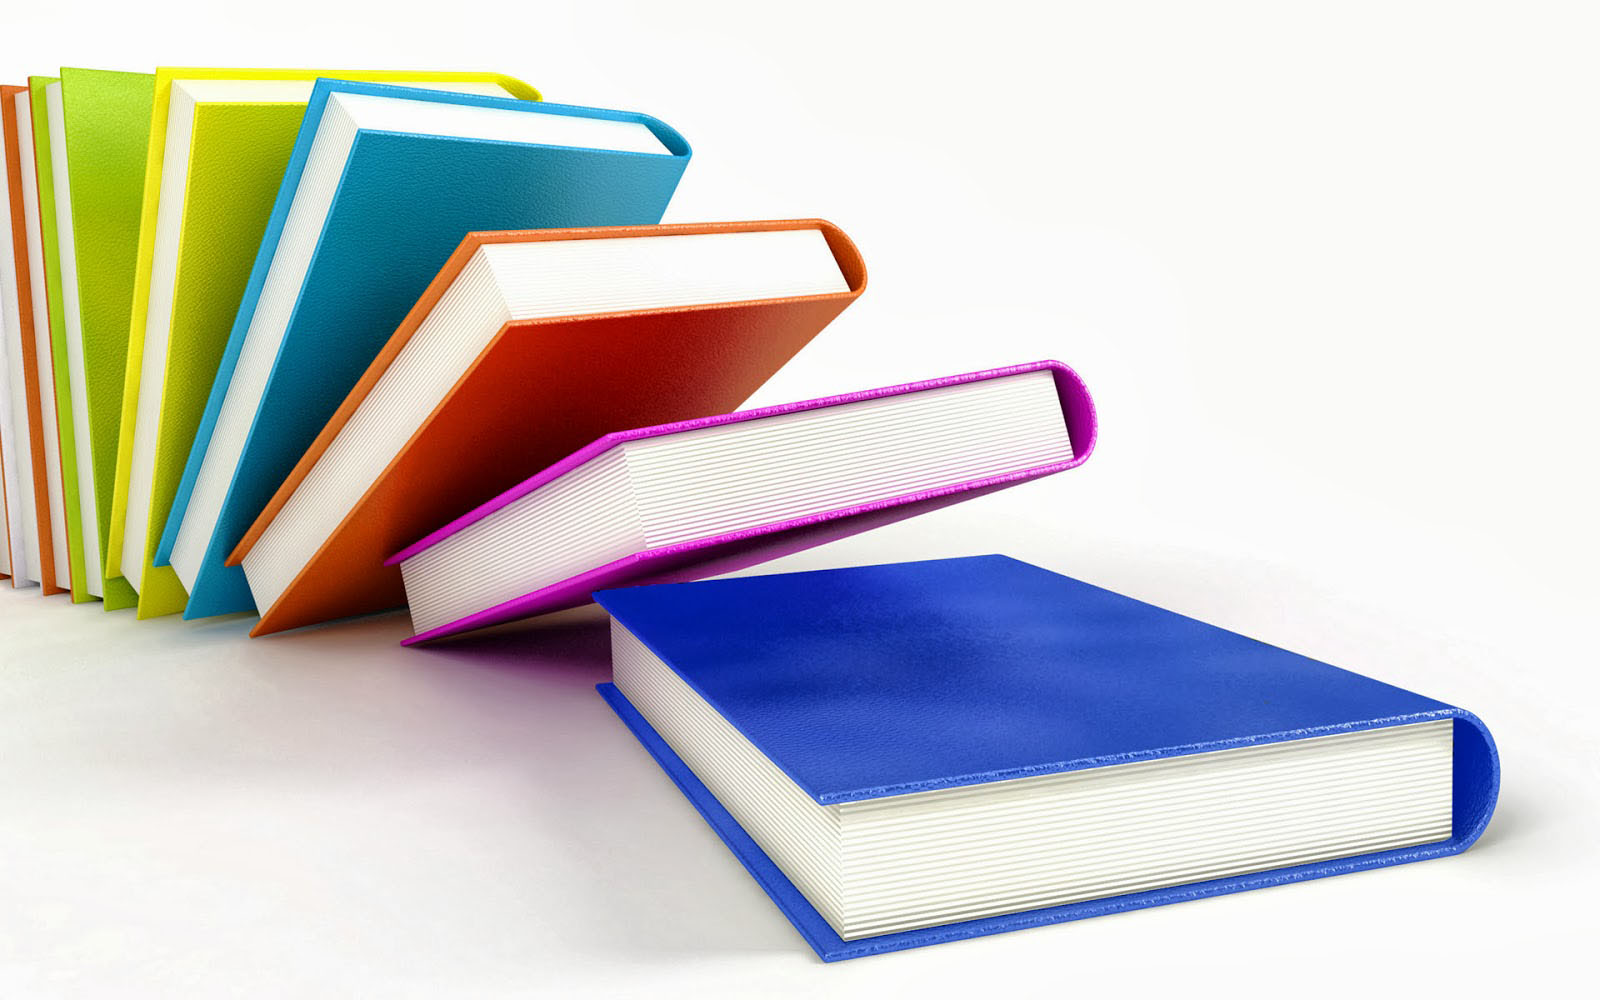 Beautiful Colorful Books For Study Wallpaper In HD